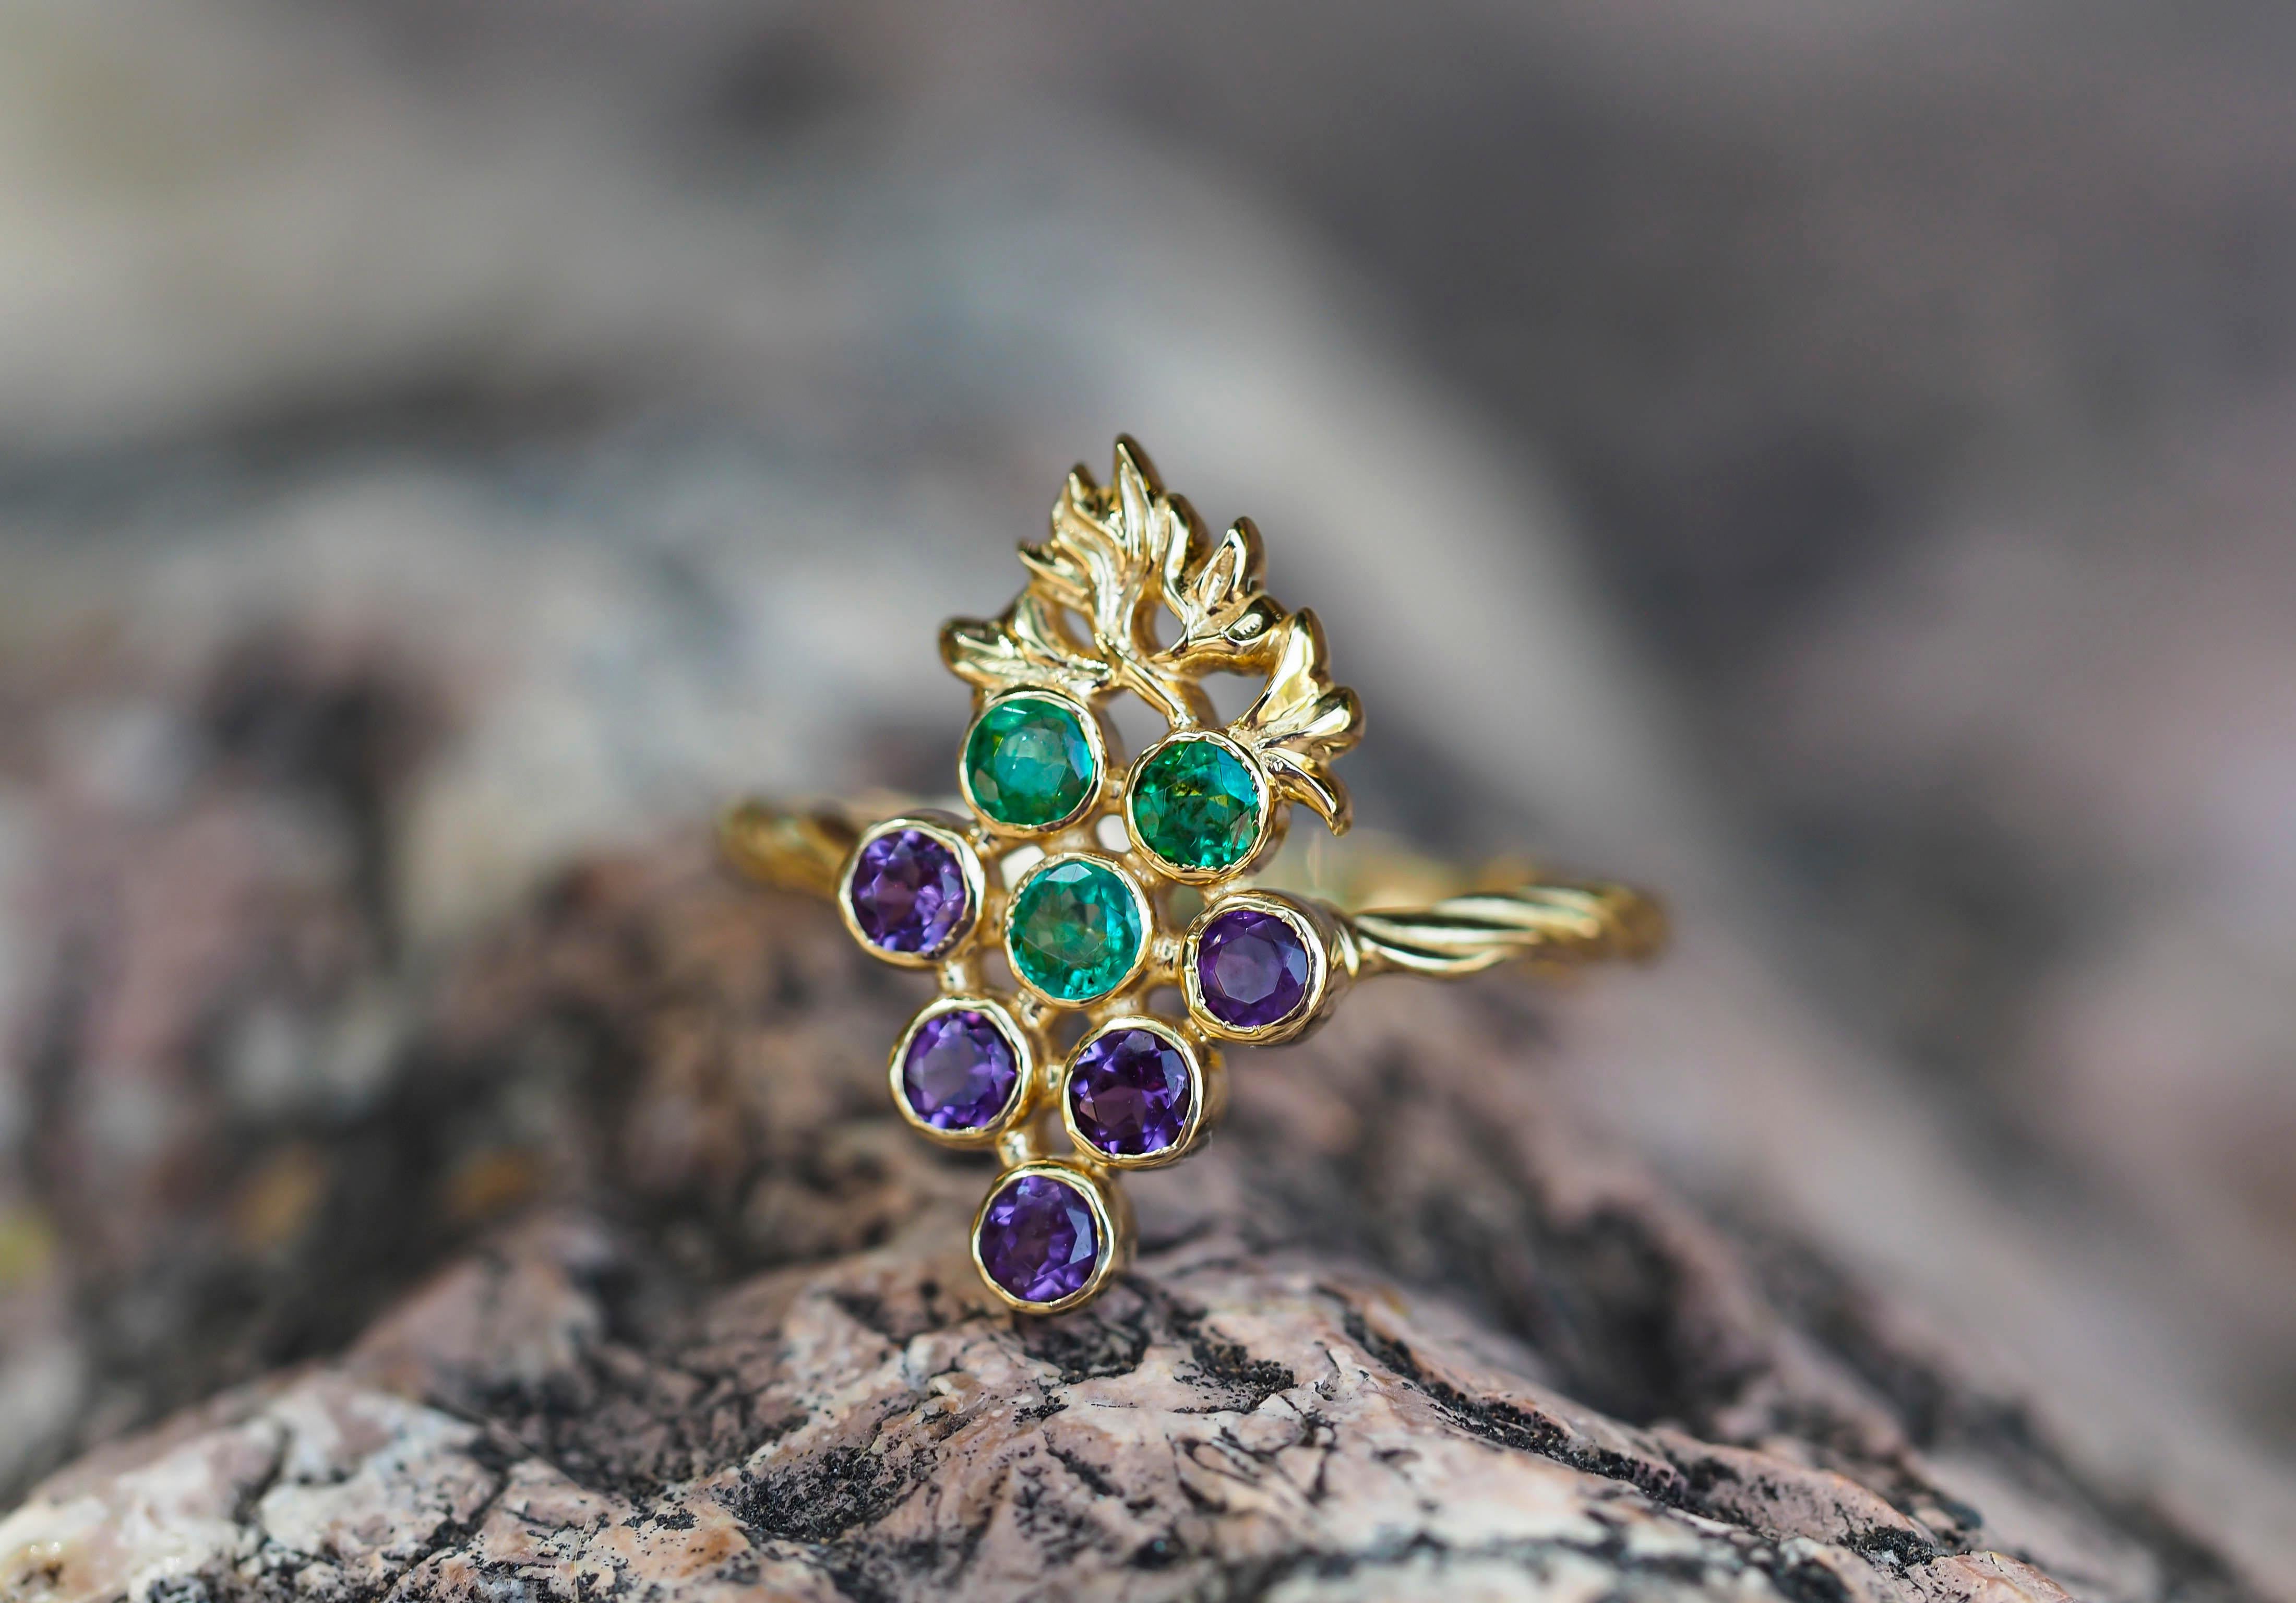 14k gold ring with natural emeralds and amethysts. 
May birthstone. February birthstone.
Metal: 14kt solid gold
Weight: 1.95 g.

Gemstones:
Natural emeralds: 3 pieces, weight - 0.33 ct approx (3 pieces x 0.11 ct)
Color - green, round cut, clarity -